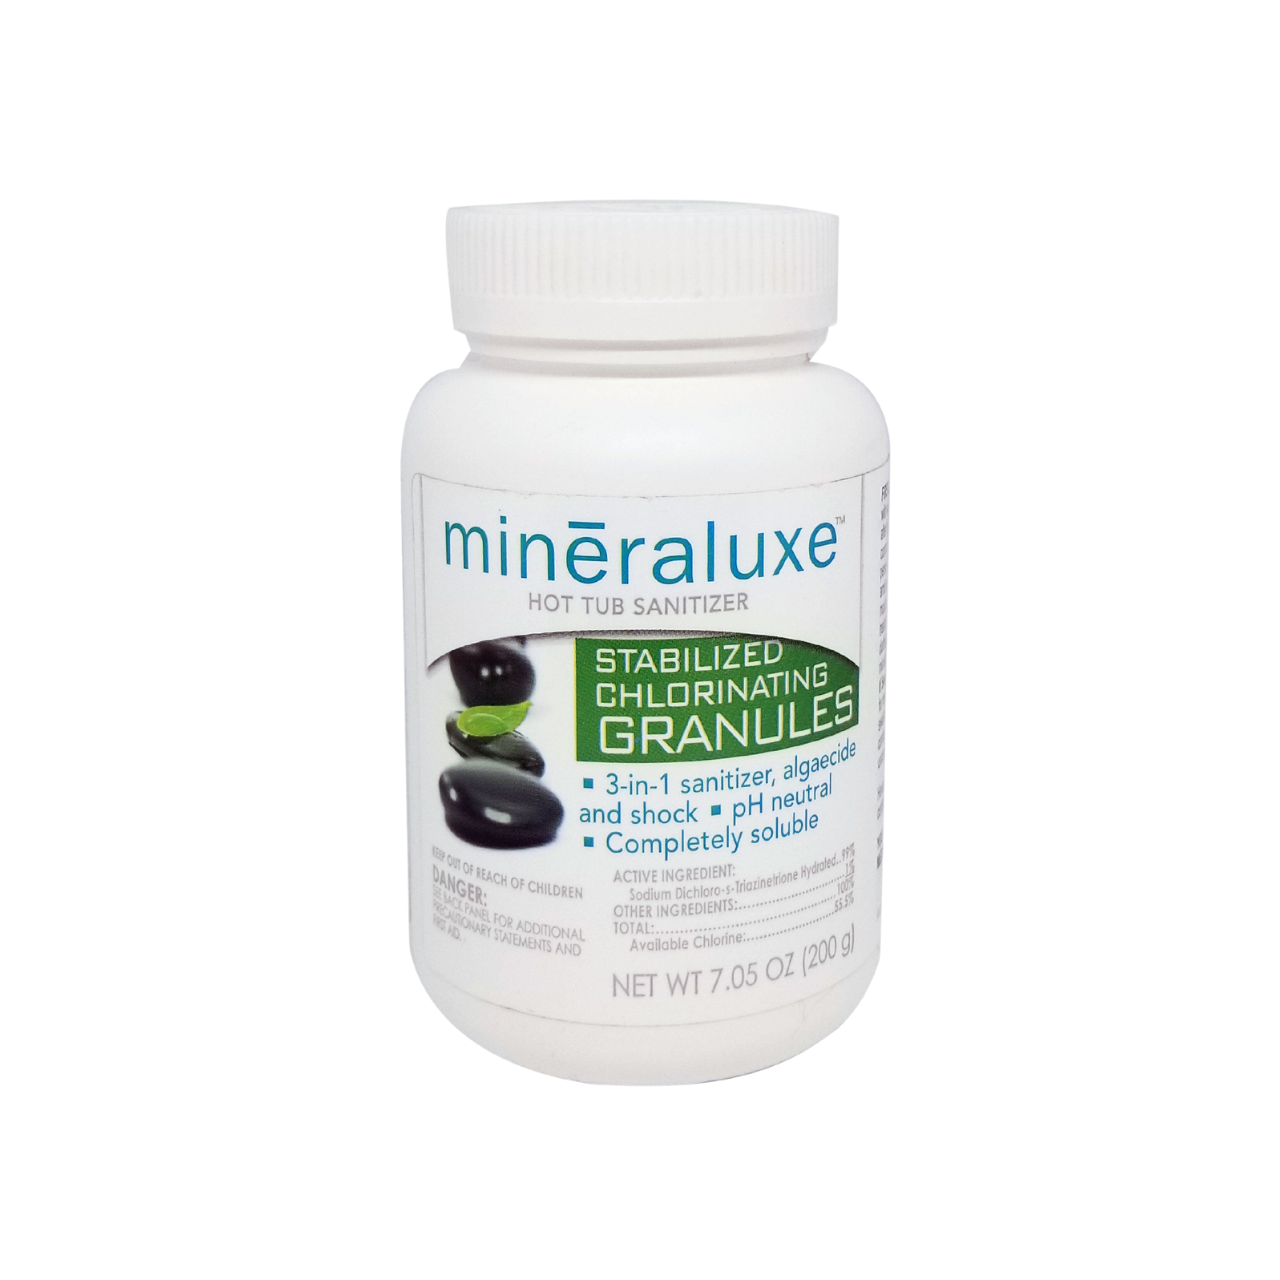 Mineraluxe™ Stabilized Chlorinating Granules